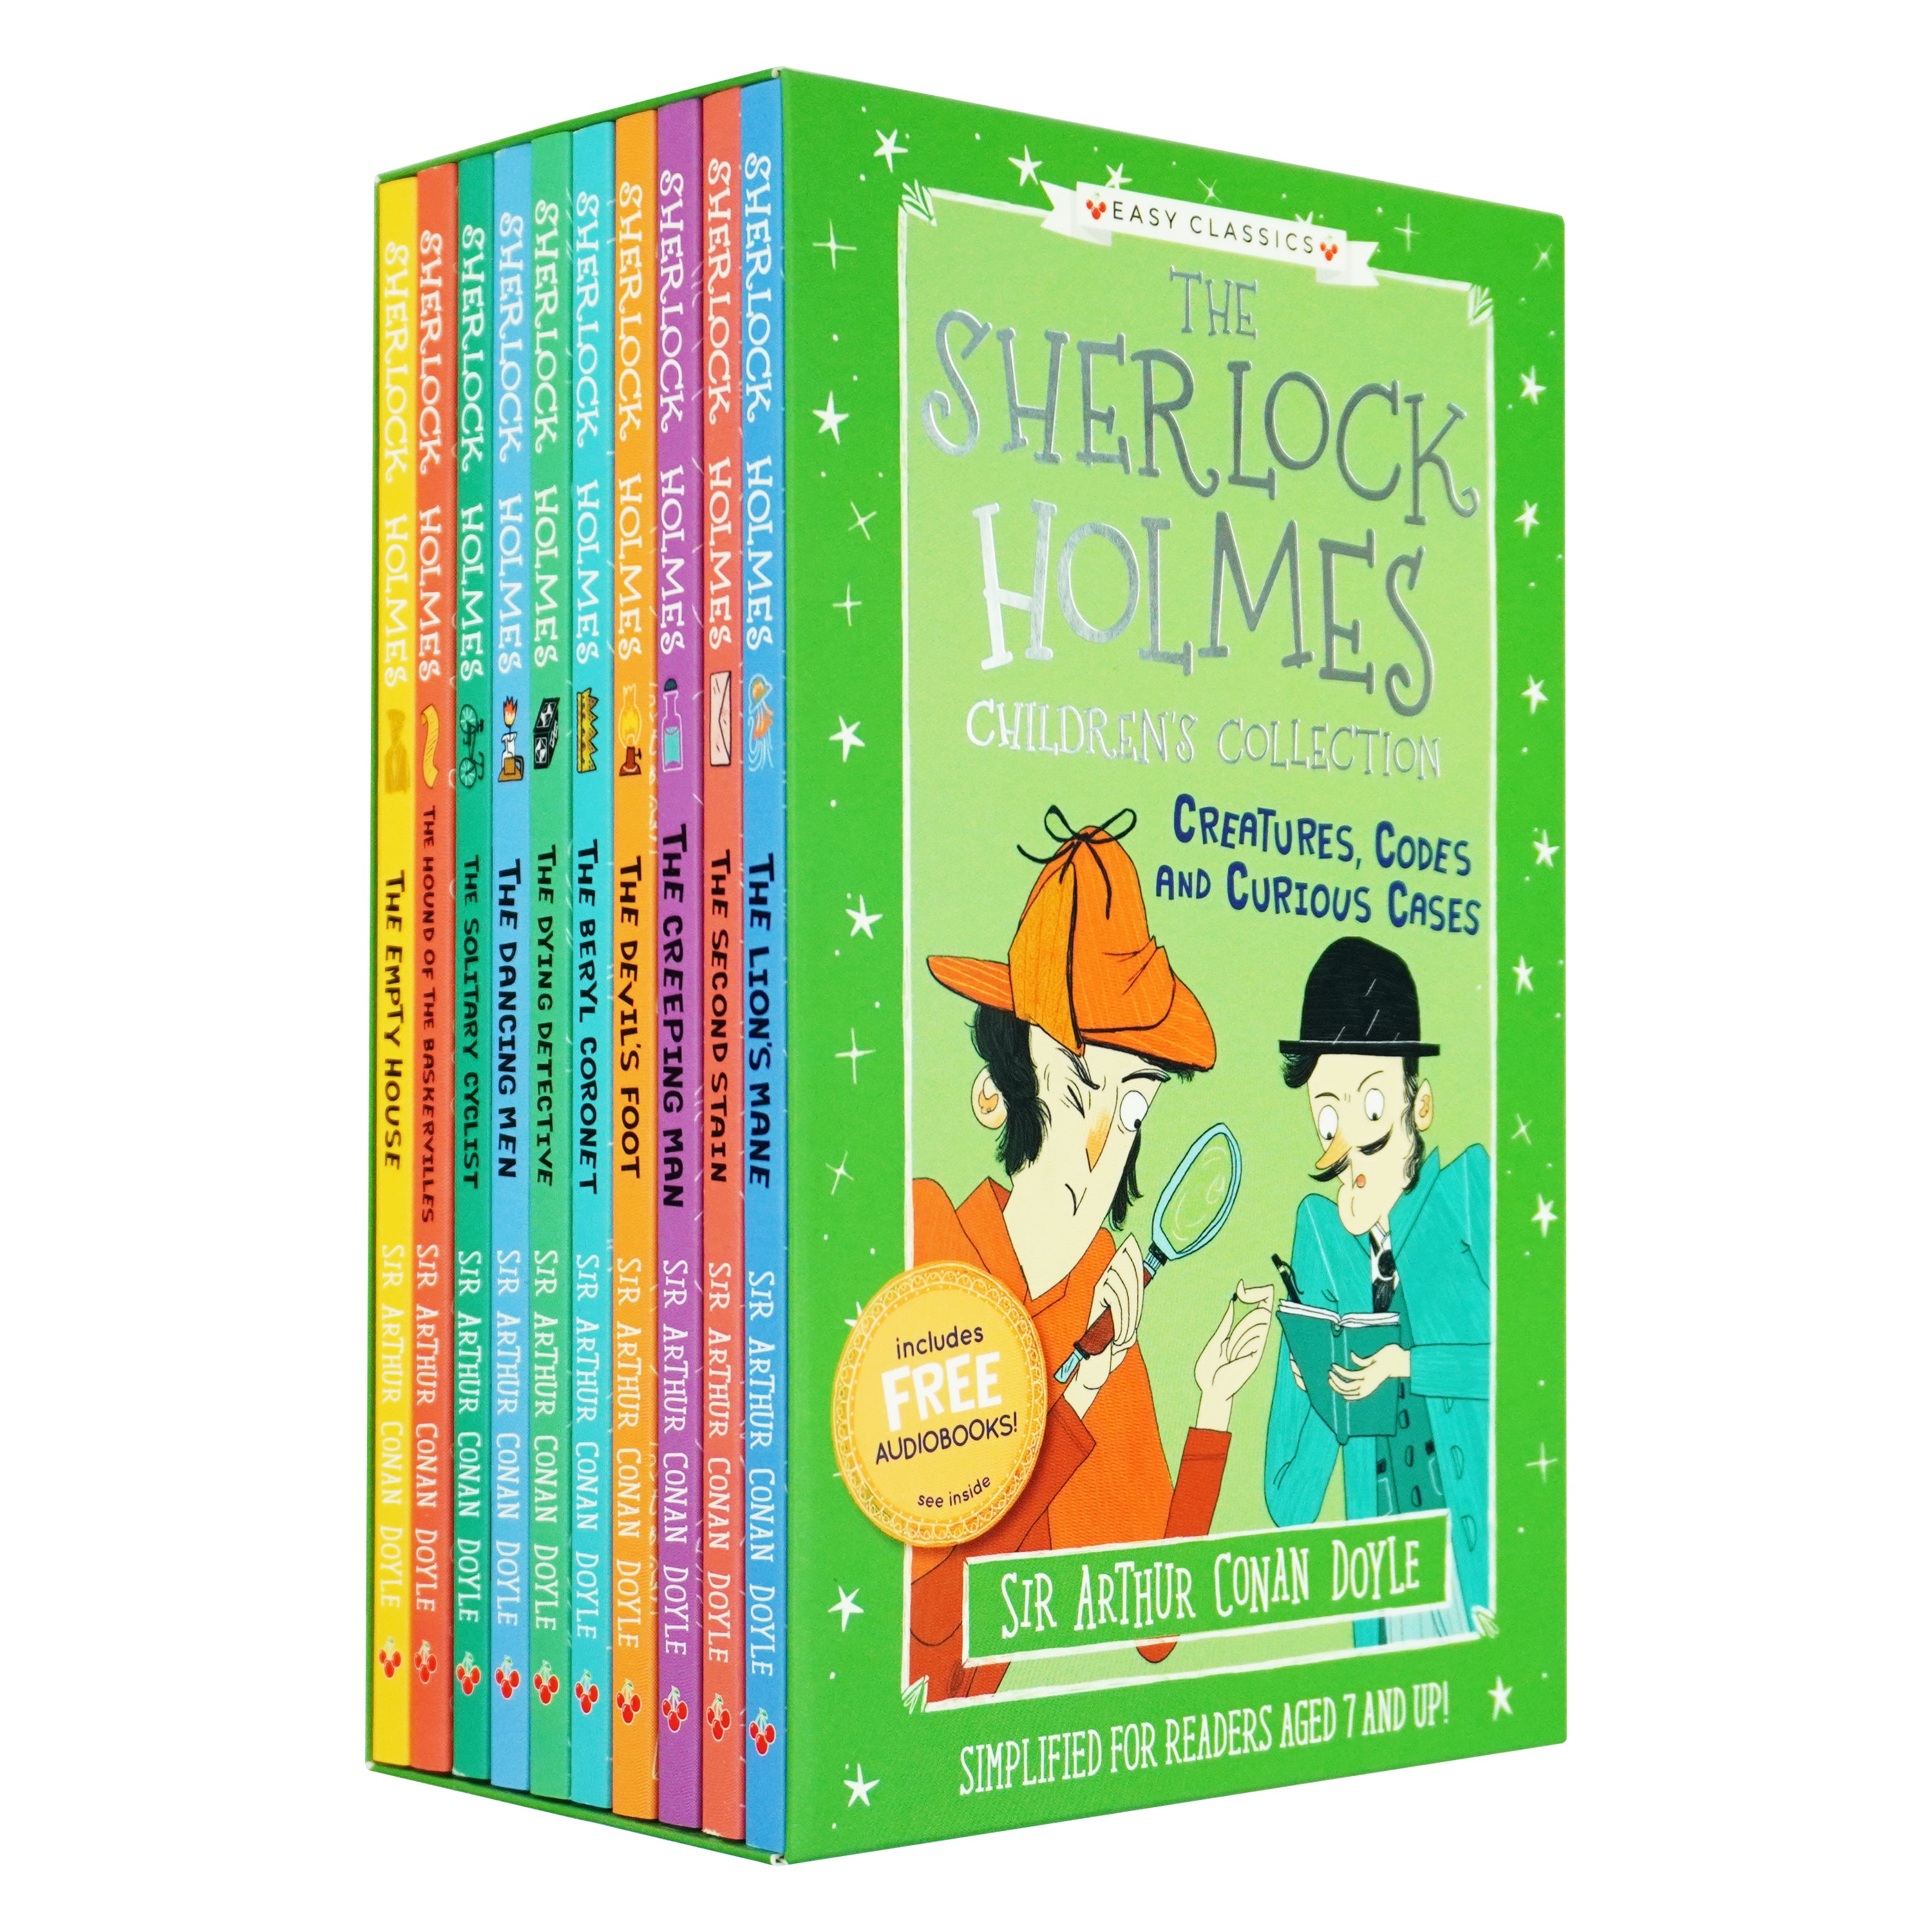 The Sherlock Holmes Children’s Collection :Creatures, Codes and Curious Cases 10 Books (Series 3) by Sir Arthur Conan Doyle - Age 9-14 - Paperback